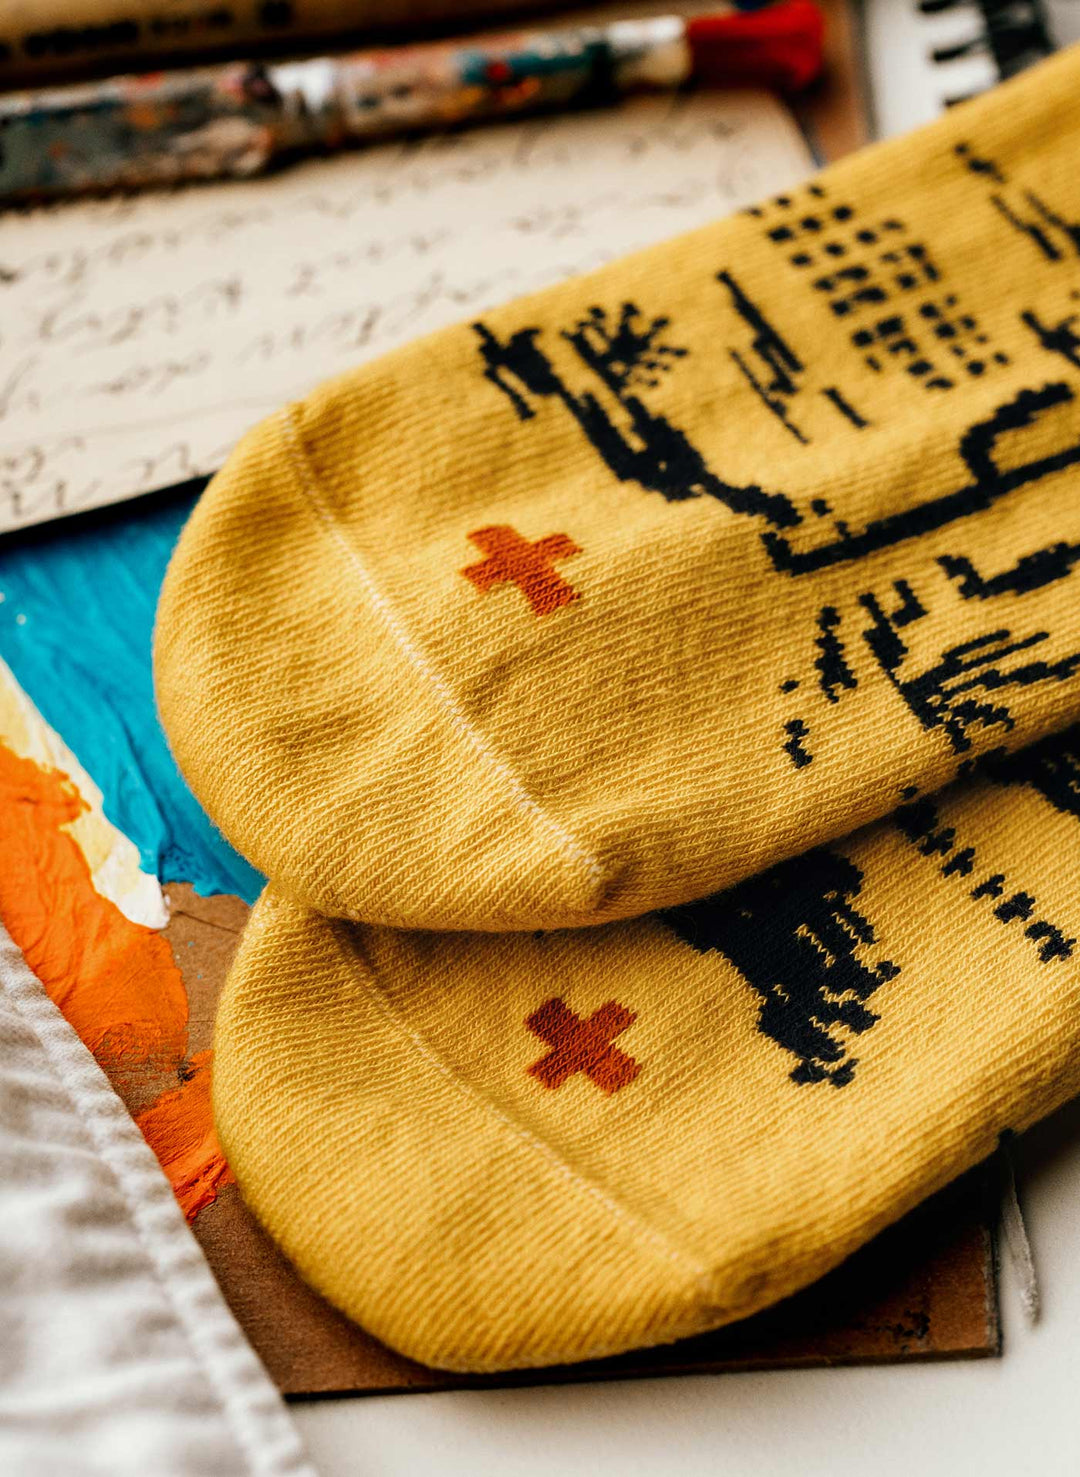 a pair of yellow socks with a red cross on them